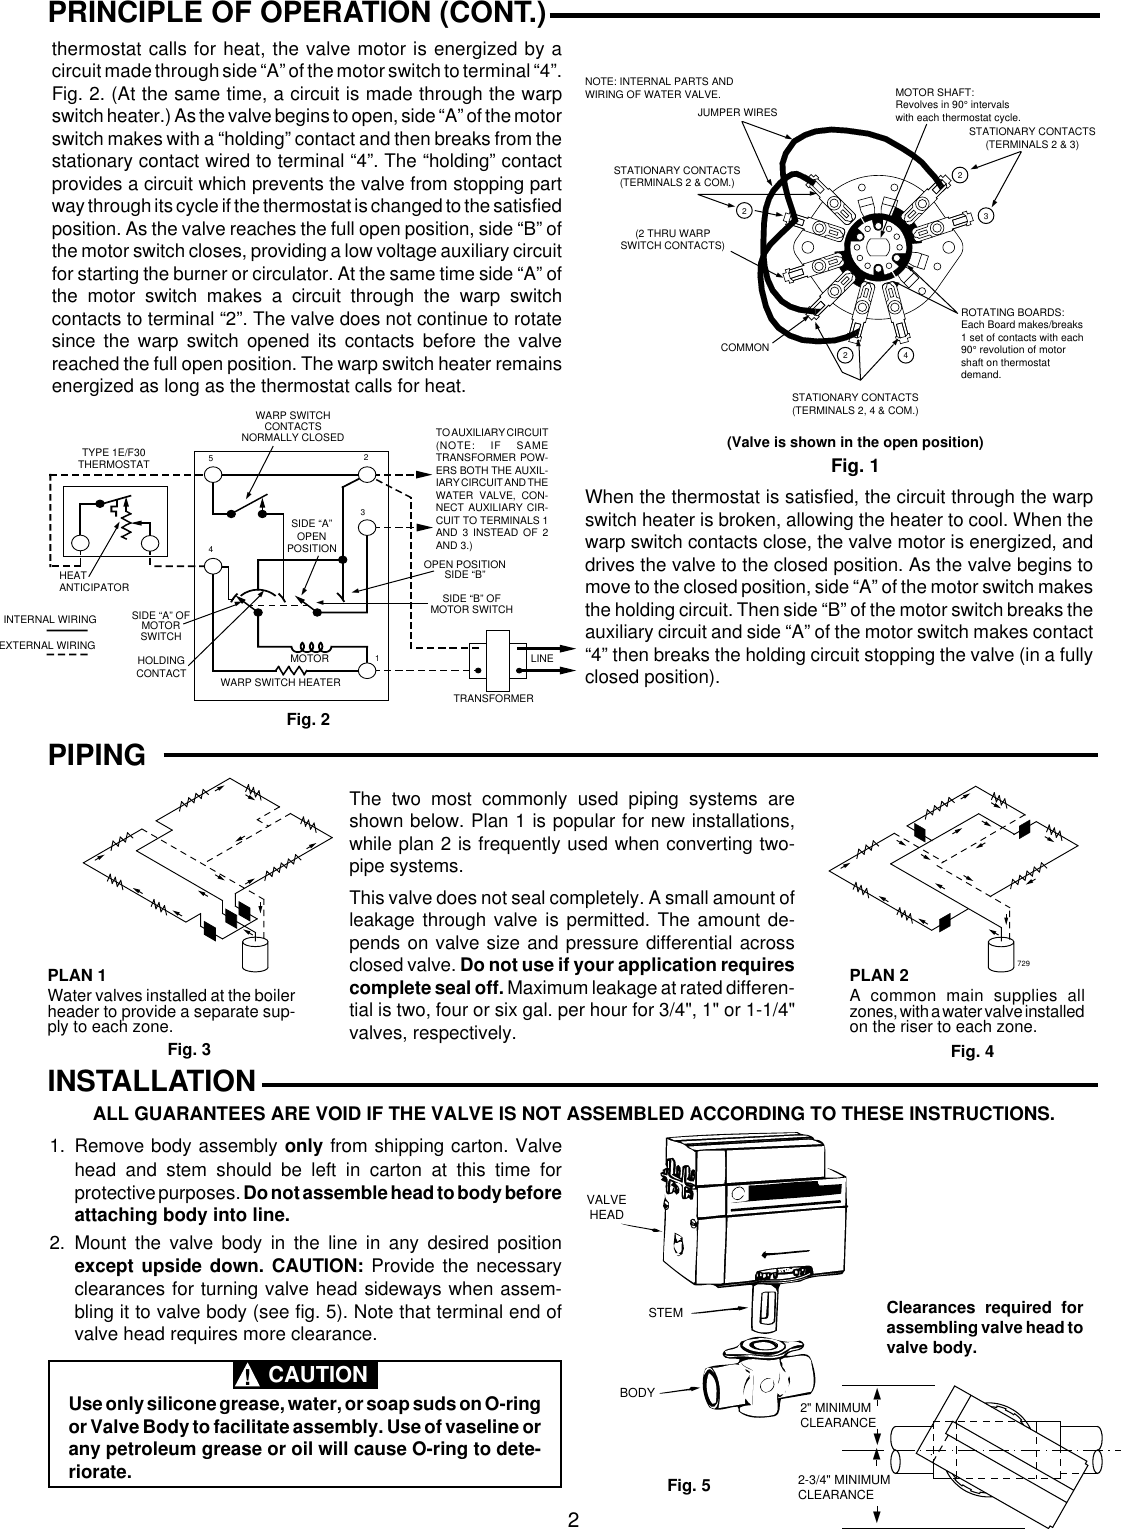 Page 2 of 8 - White-Rodgers White-Rodgers-1361-104-Hydronic-Zone-Controls-Installation-Instructions- 37-5422B (1361)  White-rodgers-1361-104-hydronic-zone-controls-installation-instructions